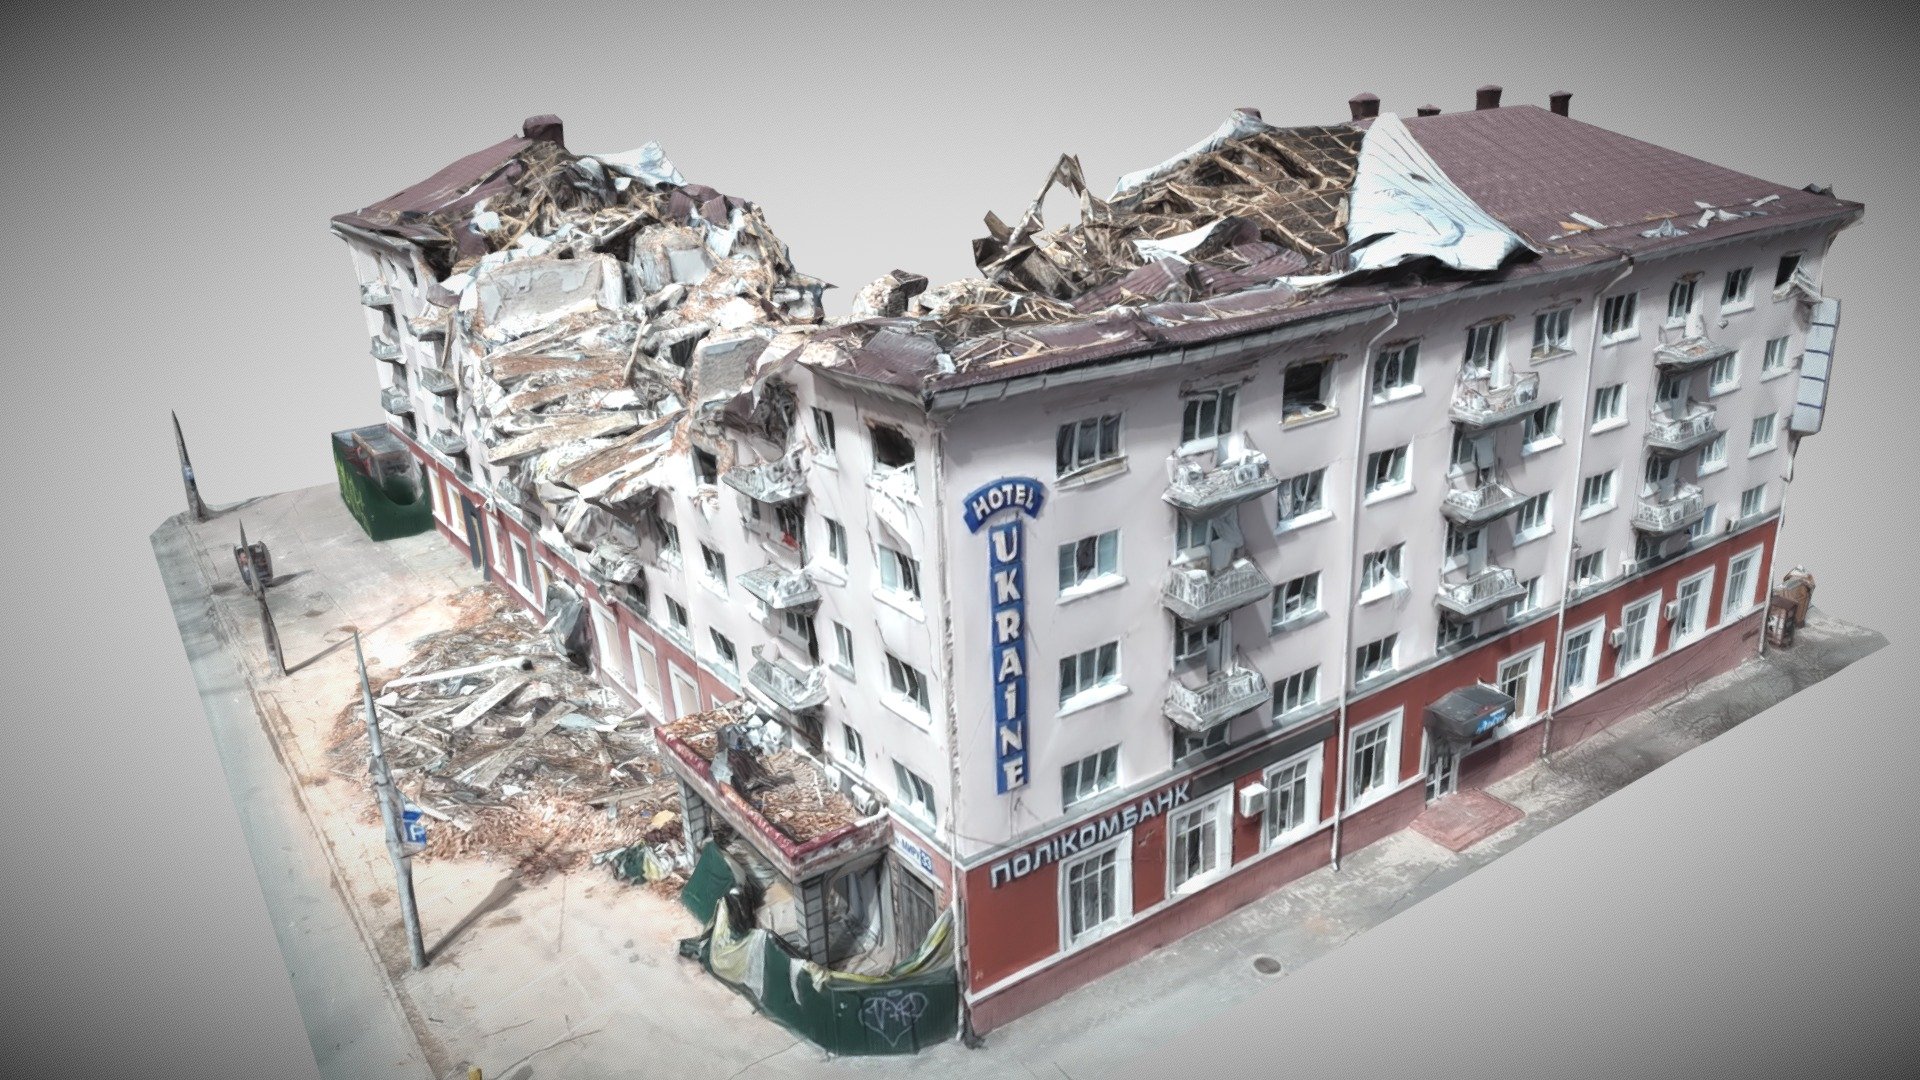 On March 12, 2022, near the besieged Chernihiv, in the very center of the city, the Russian invaders bombed the hotel &ldquo;Ukraine